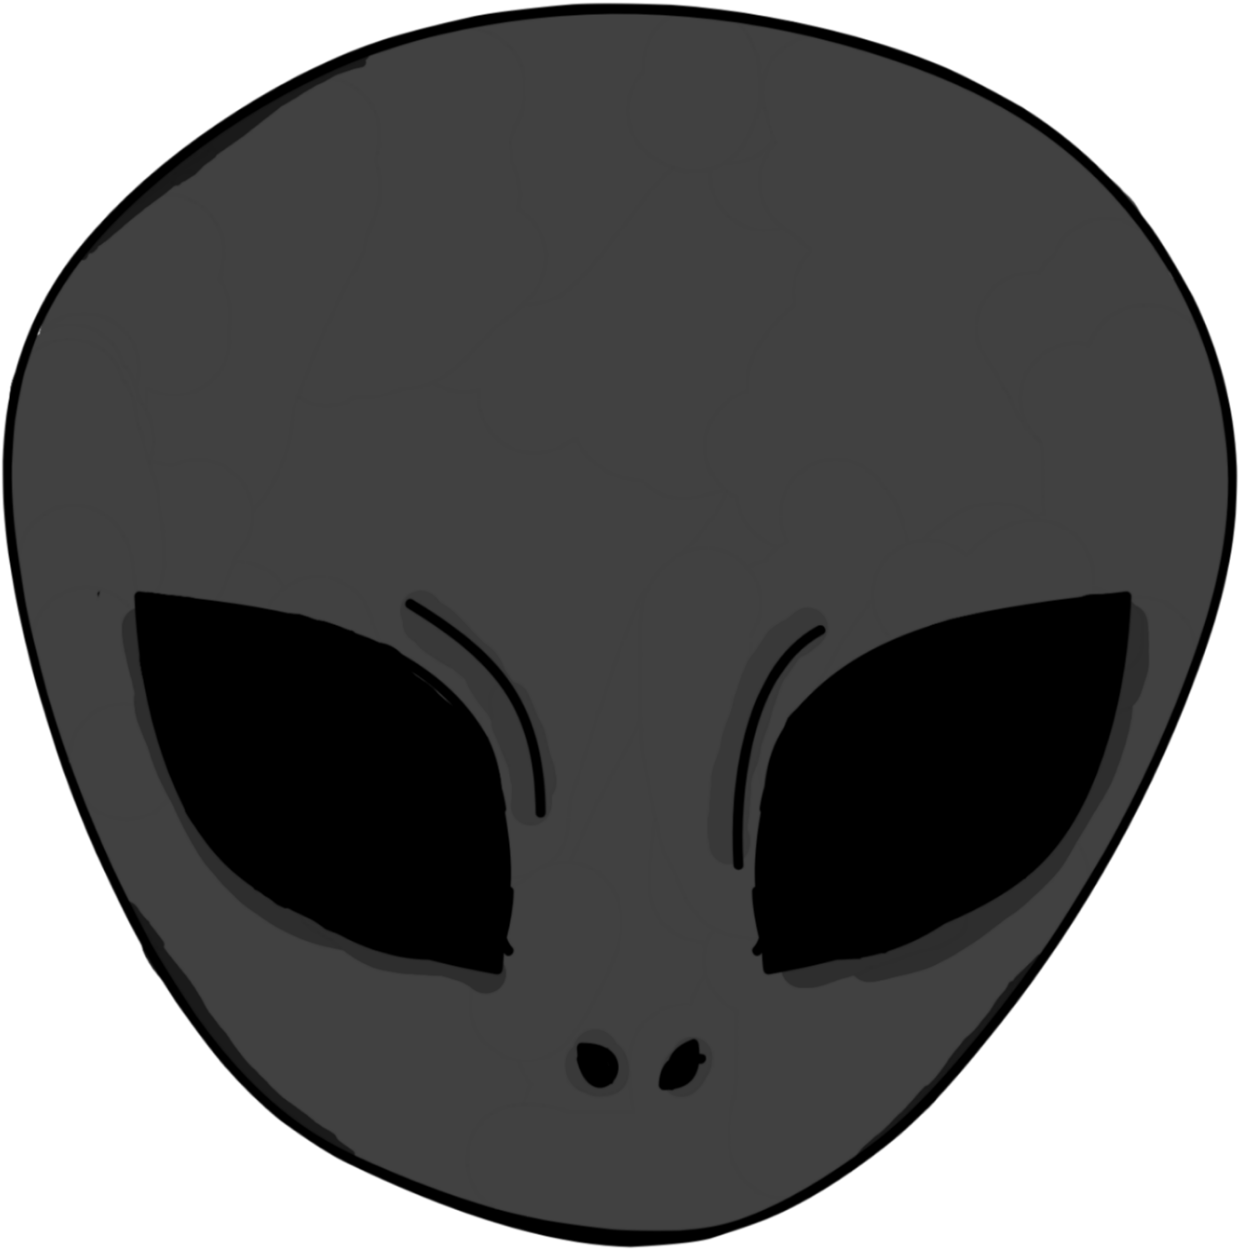 A Grey Alien Face With Large Eyes